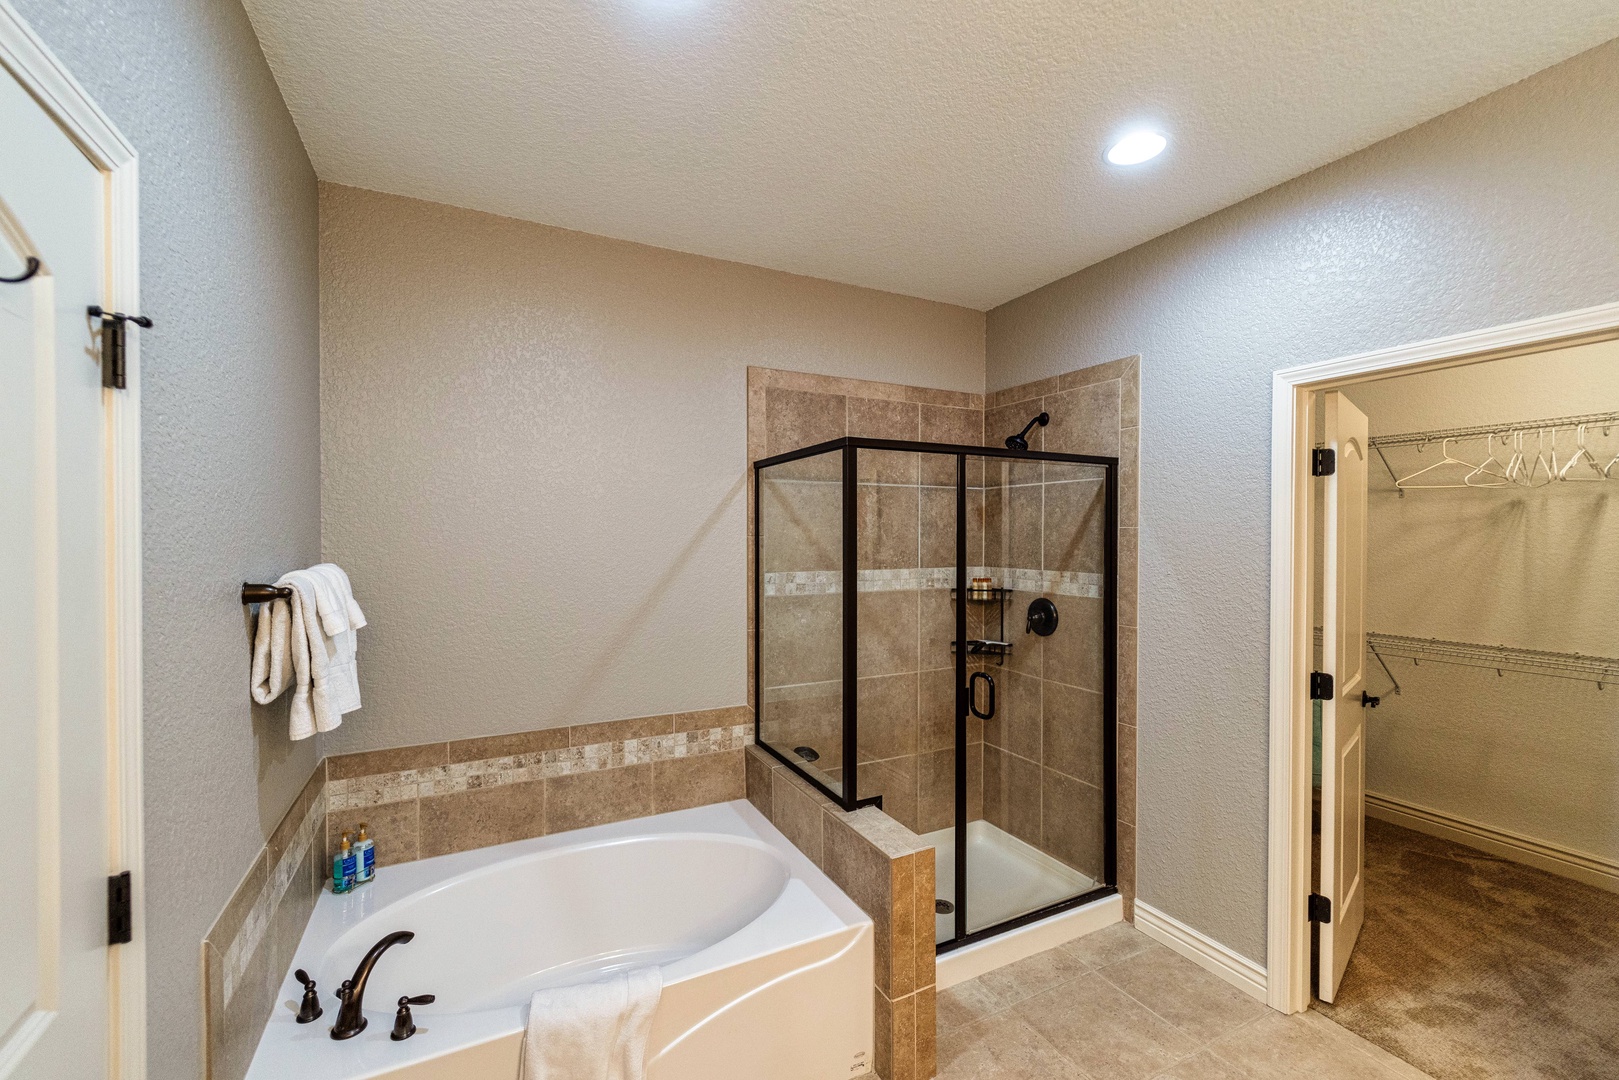 En-suite with dual sinks, soaking tub, and stand-up shower